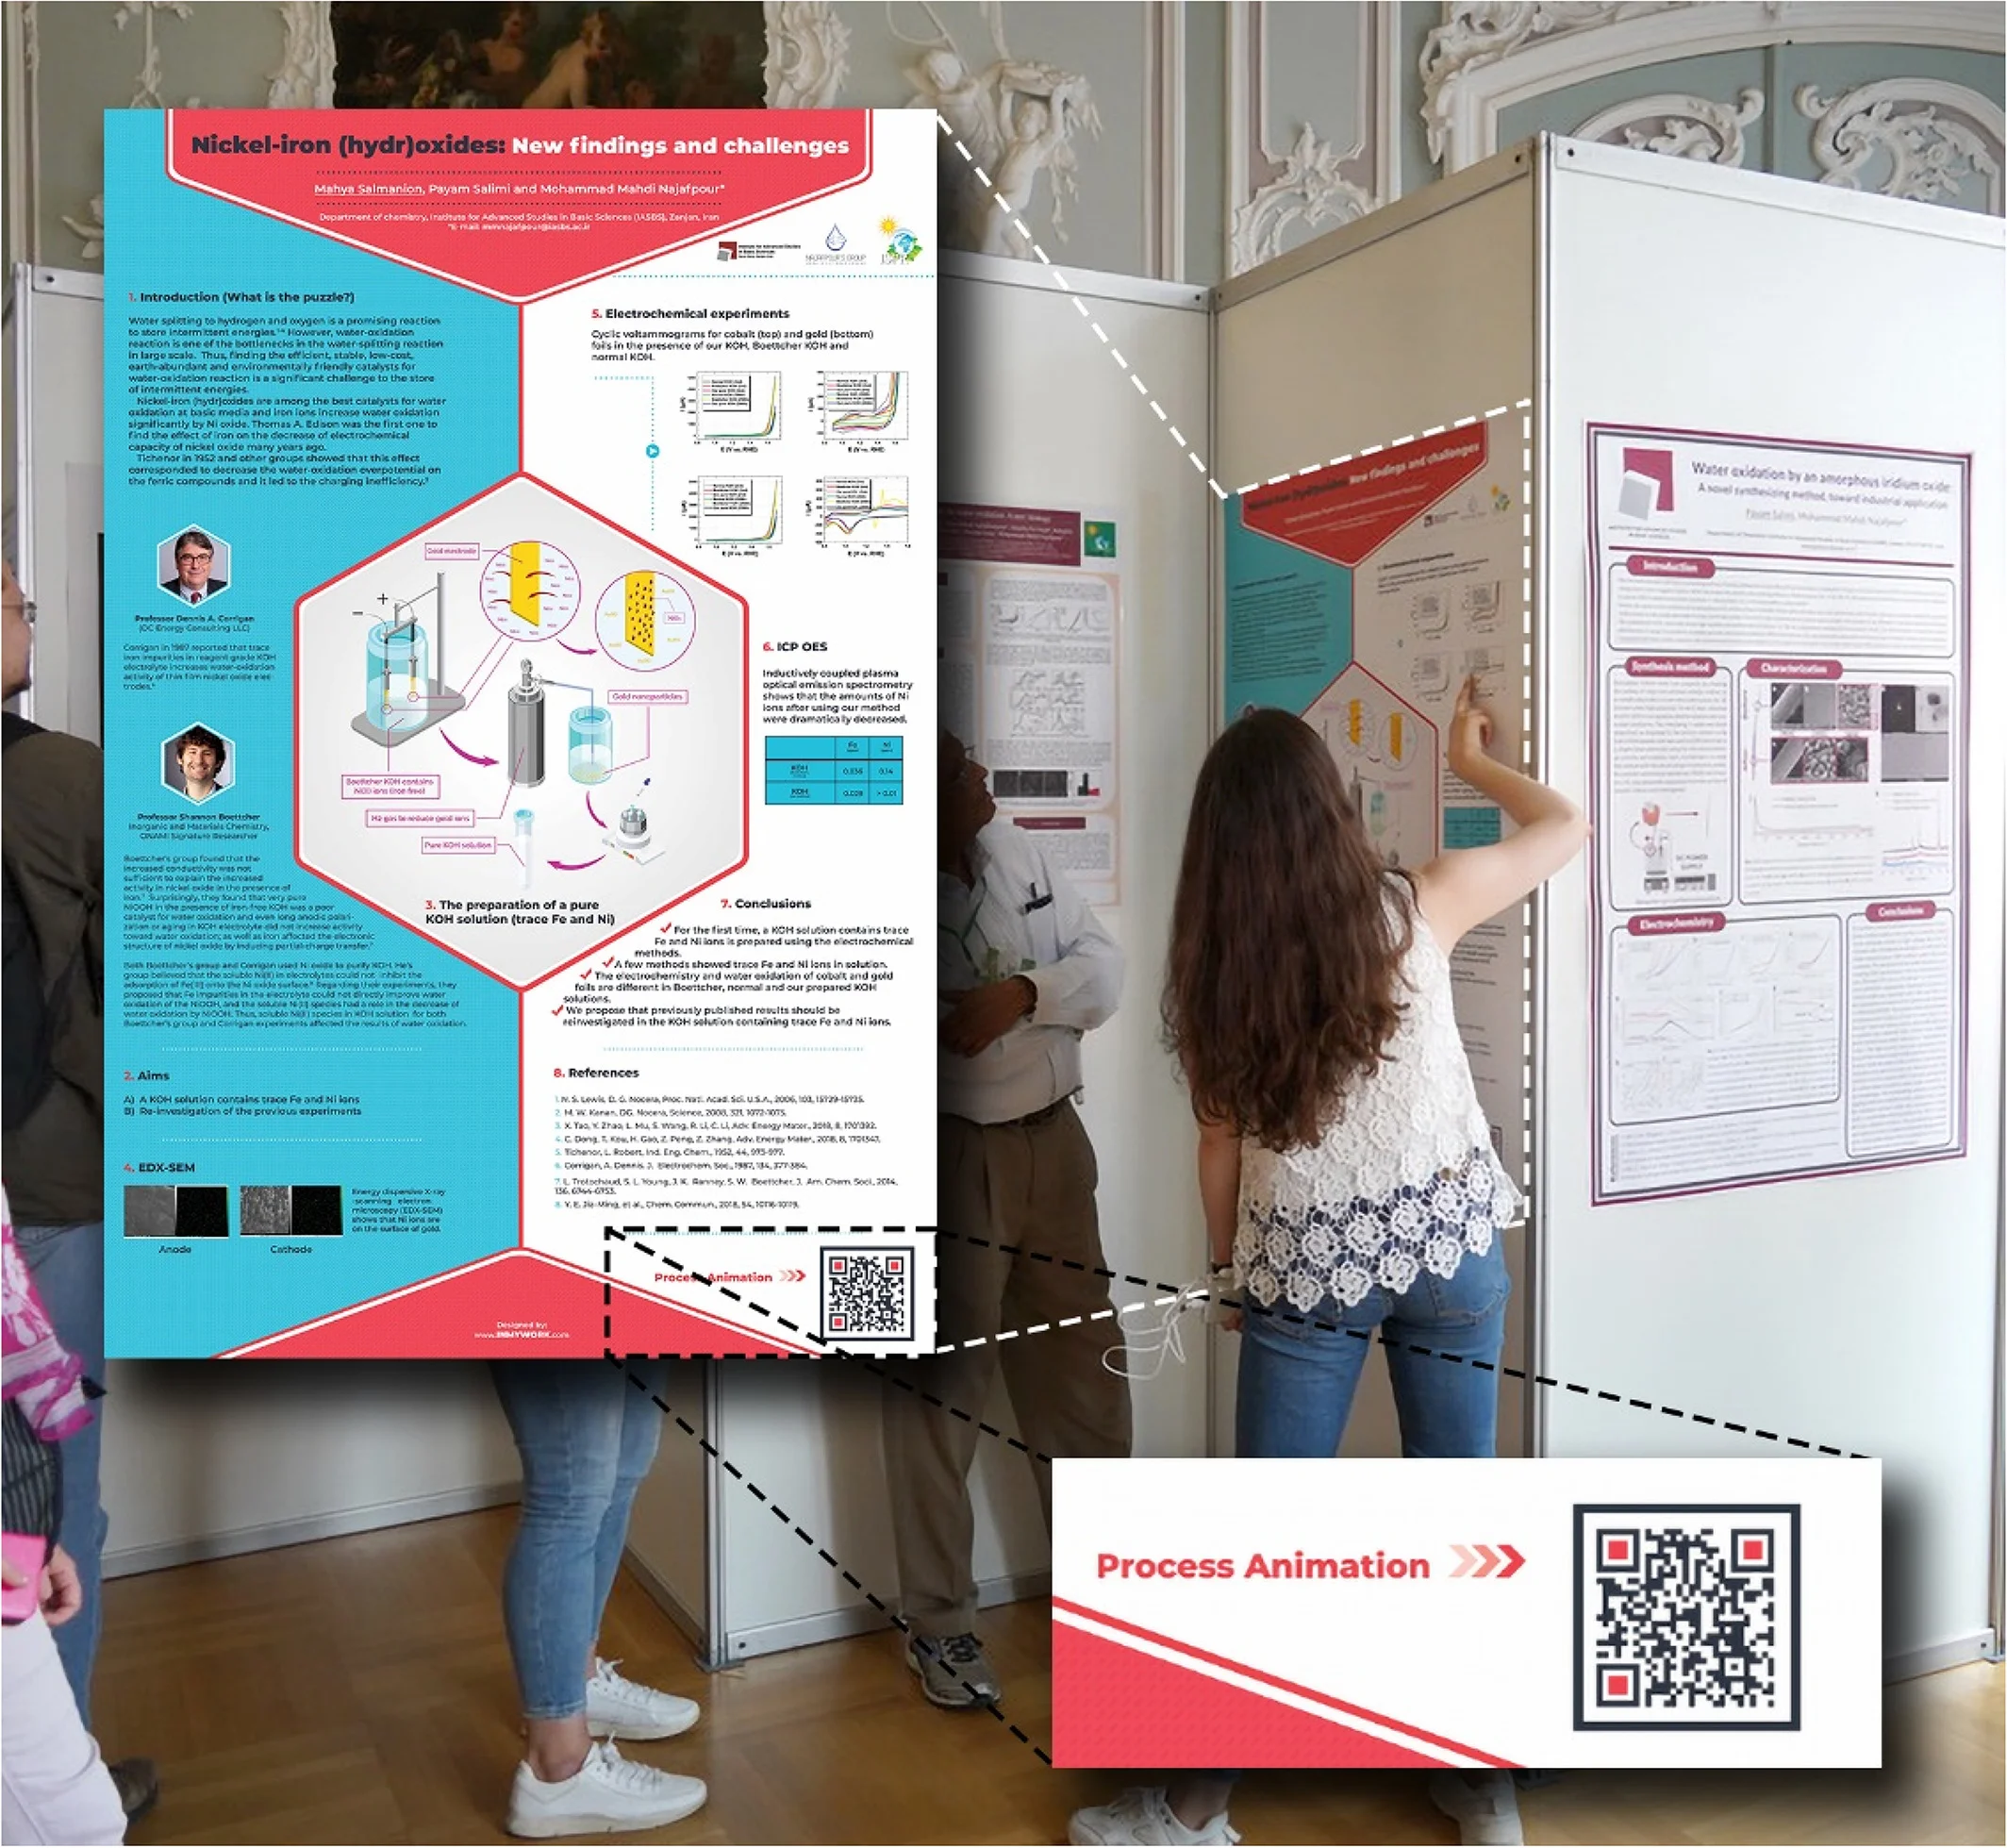 animation and Augmented reality (AR) in scientific poster